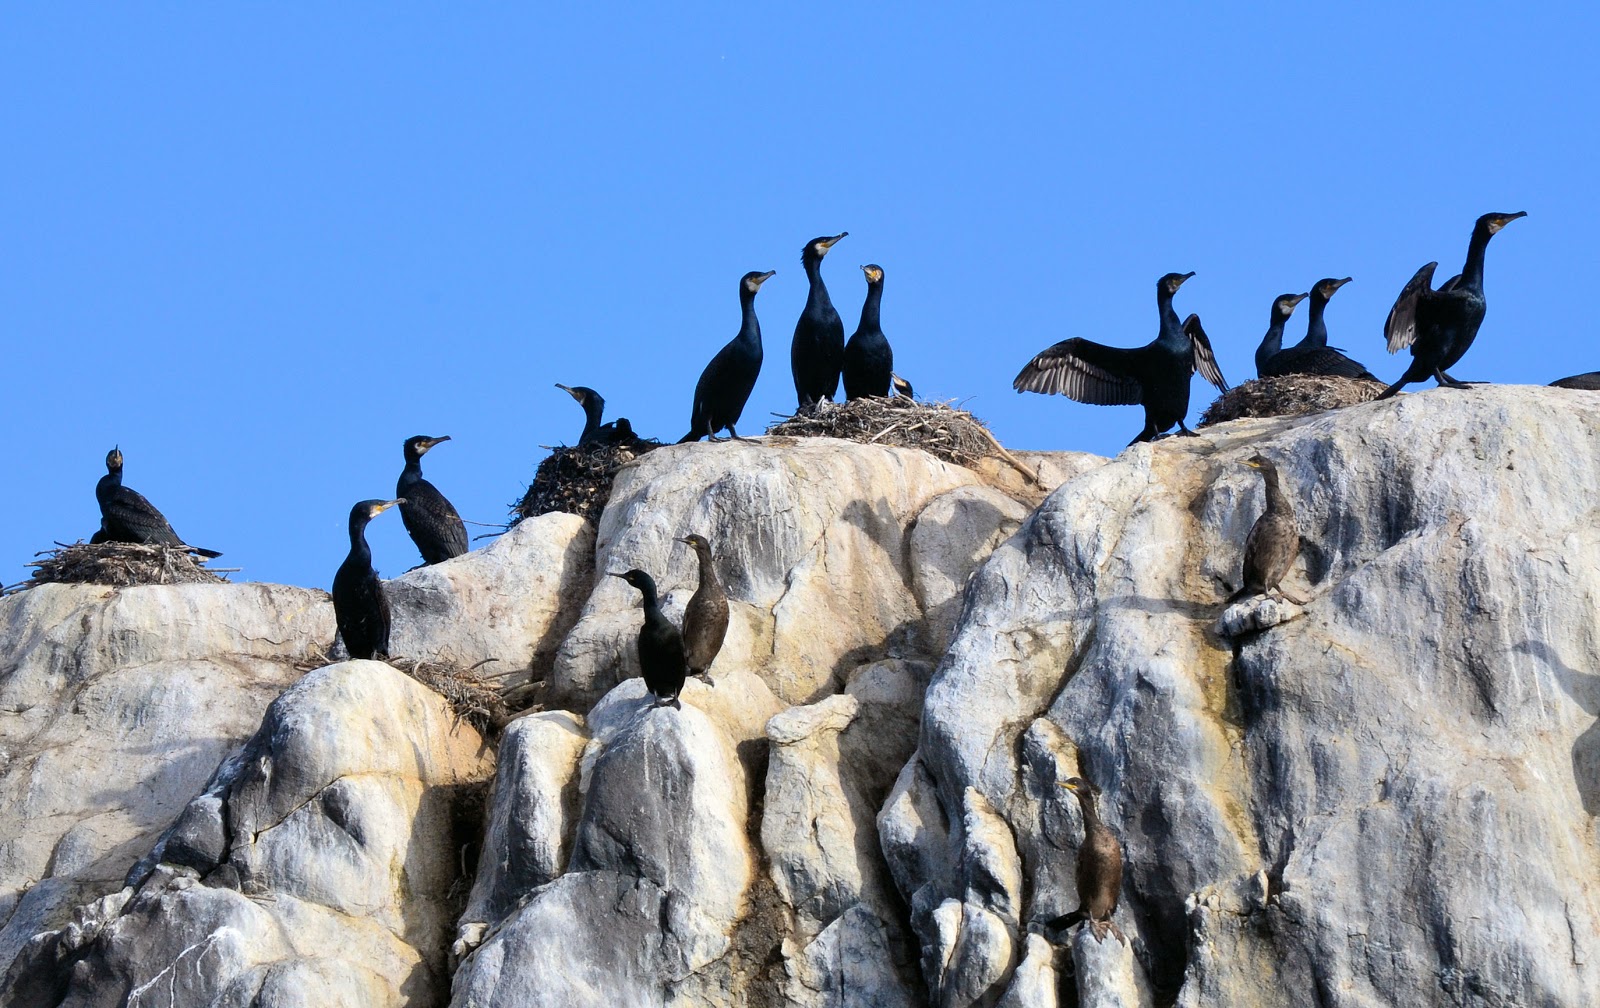 Flocks of cormorants cling to the craggy coastline, some drying their wings, others protecting their nests.